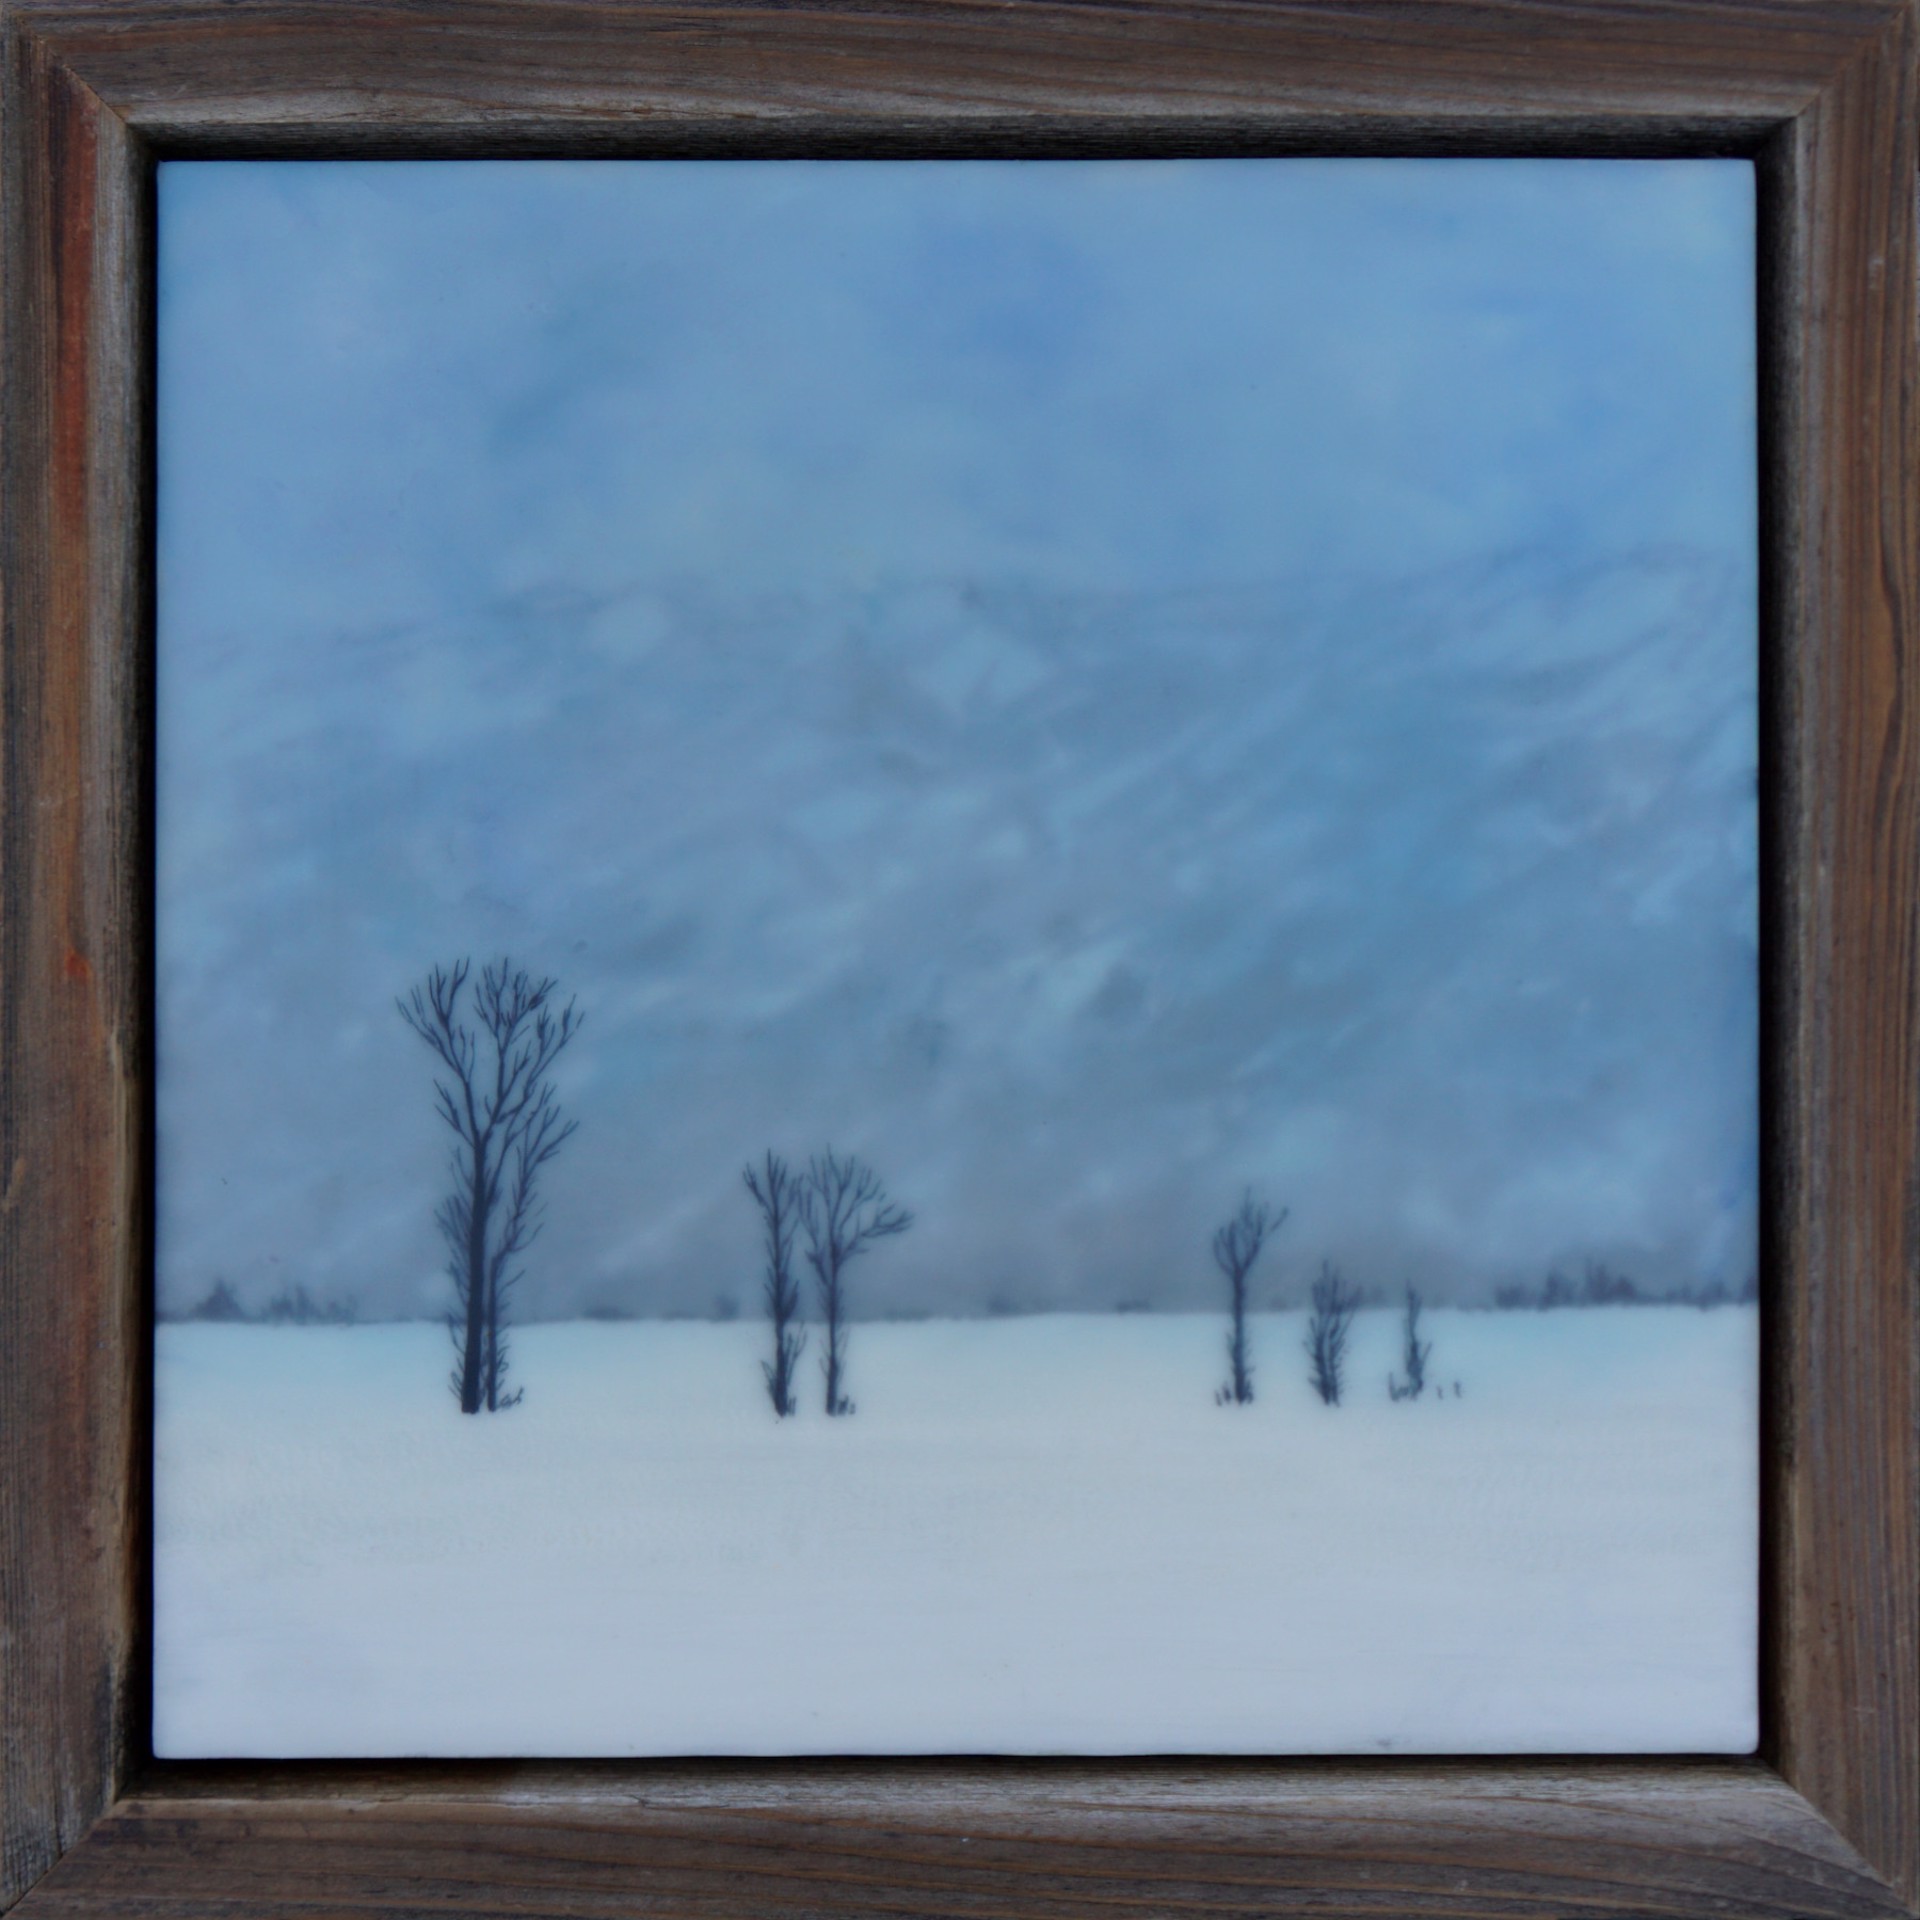 An Original Encaustic And Milk Paint Painting Of A Snow covered Landscape With Four Tree Silhouettes And A Misty Treed Hill In The Background , By Bridgette Meinhold